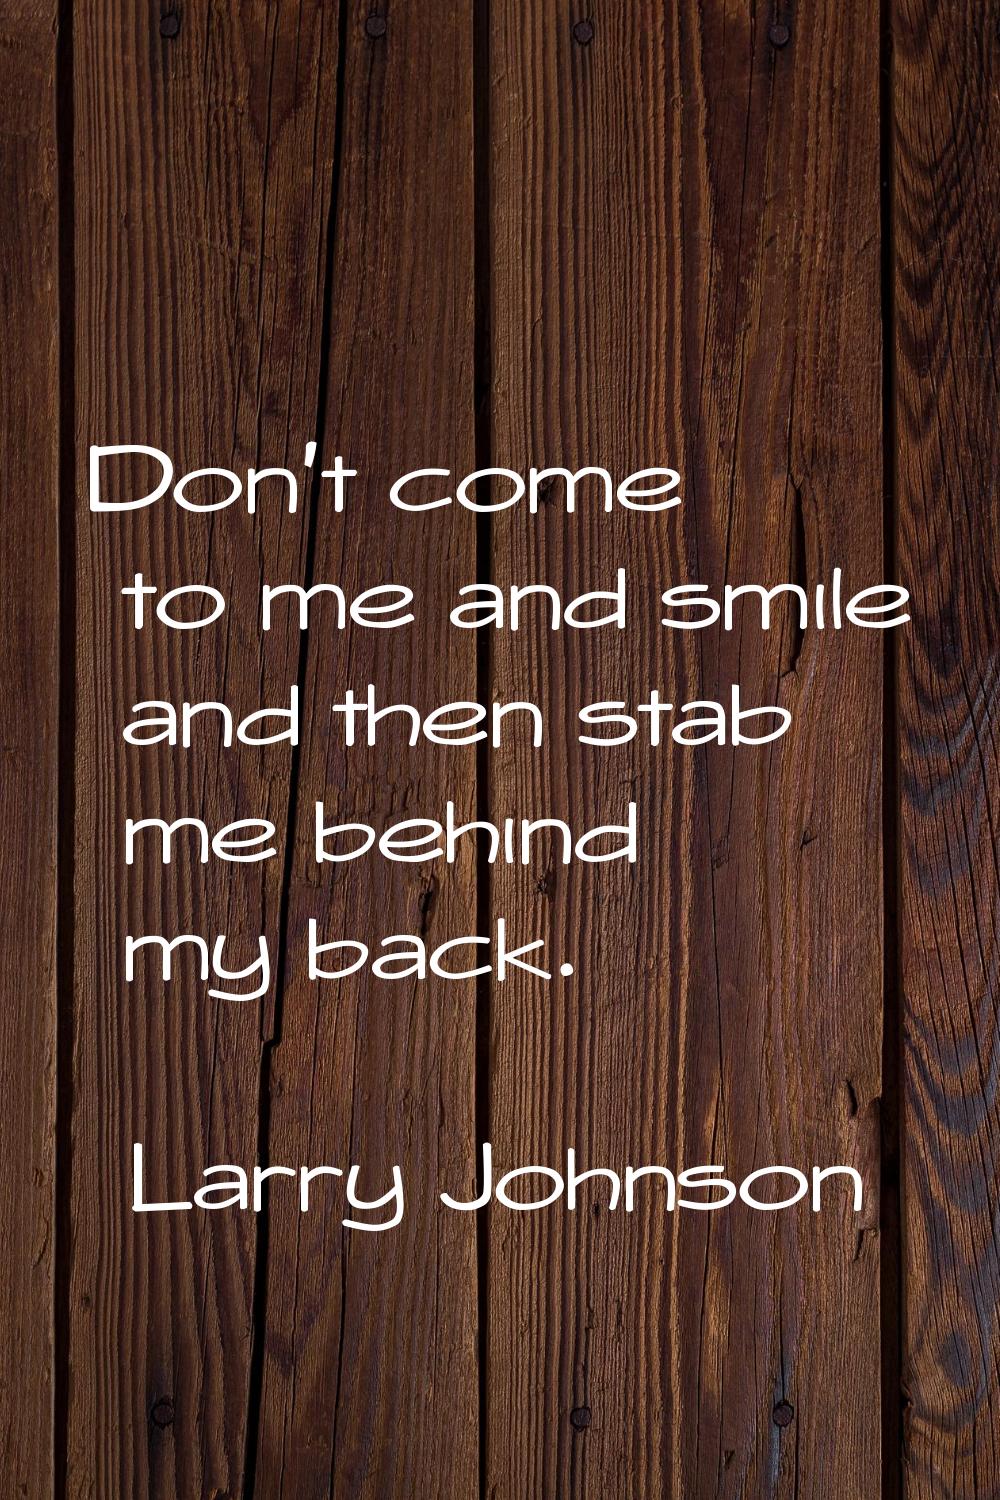 Don't come to me and smile and then stab me behind my back.